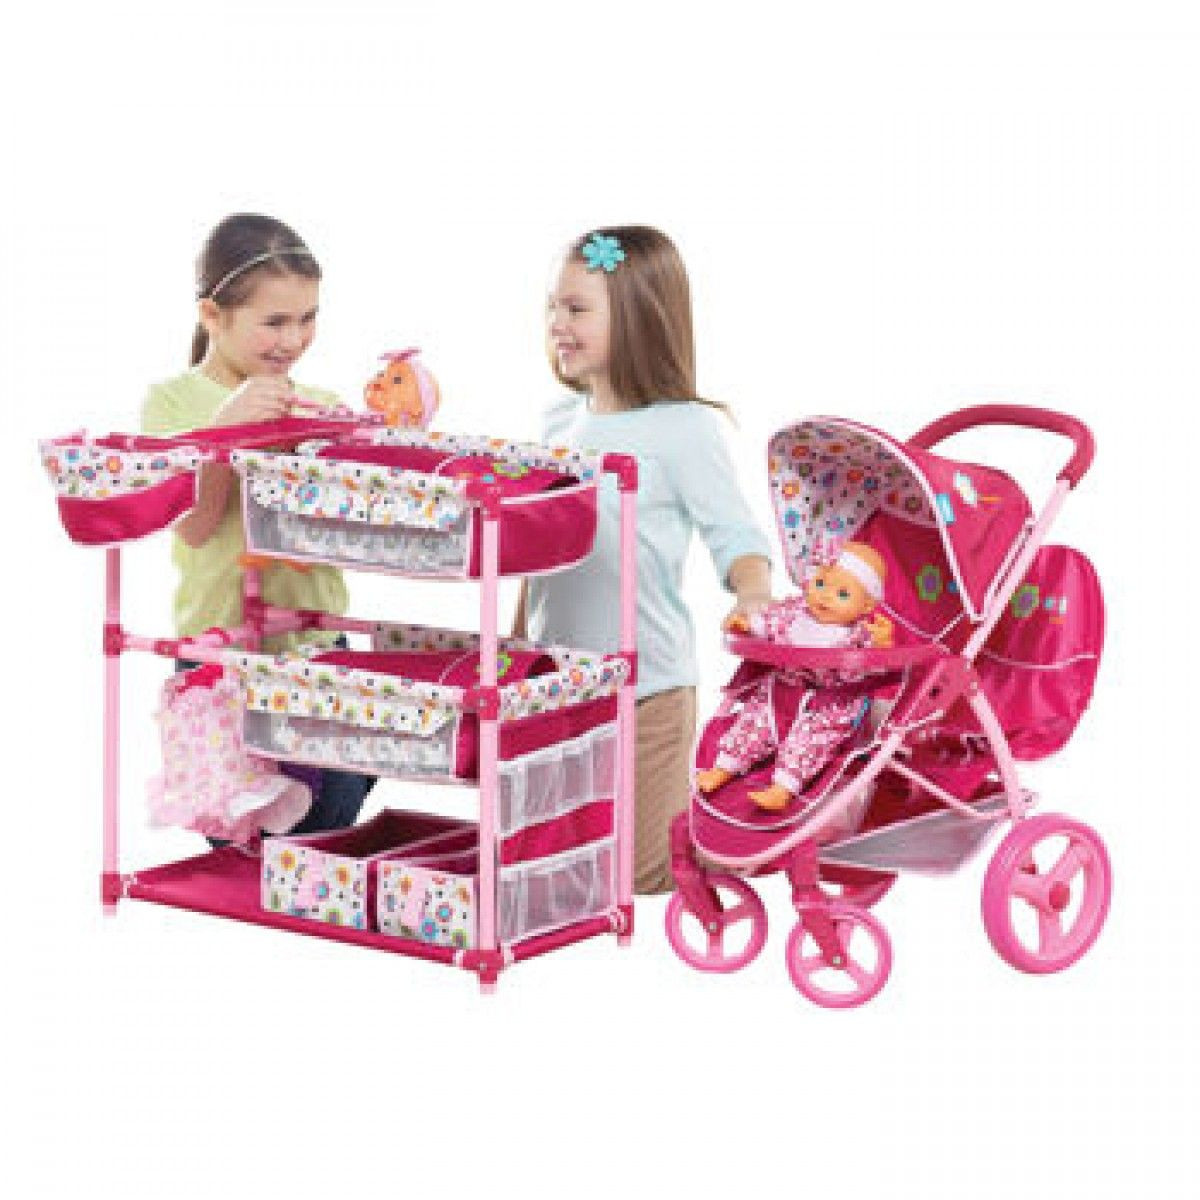 Baby Doll With Stroller Gift Set
 Malibu Doll Stroller & Activity Center Playset $34 99